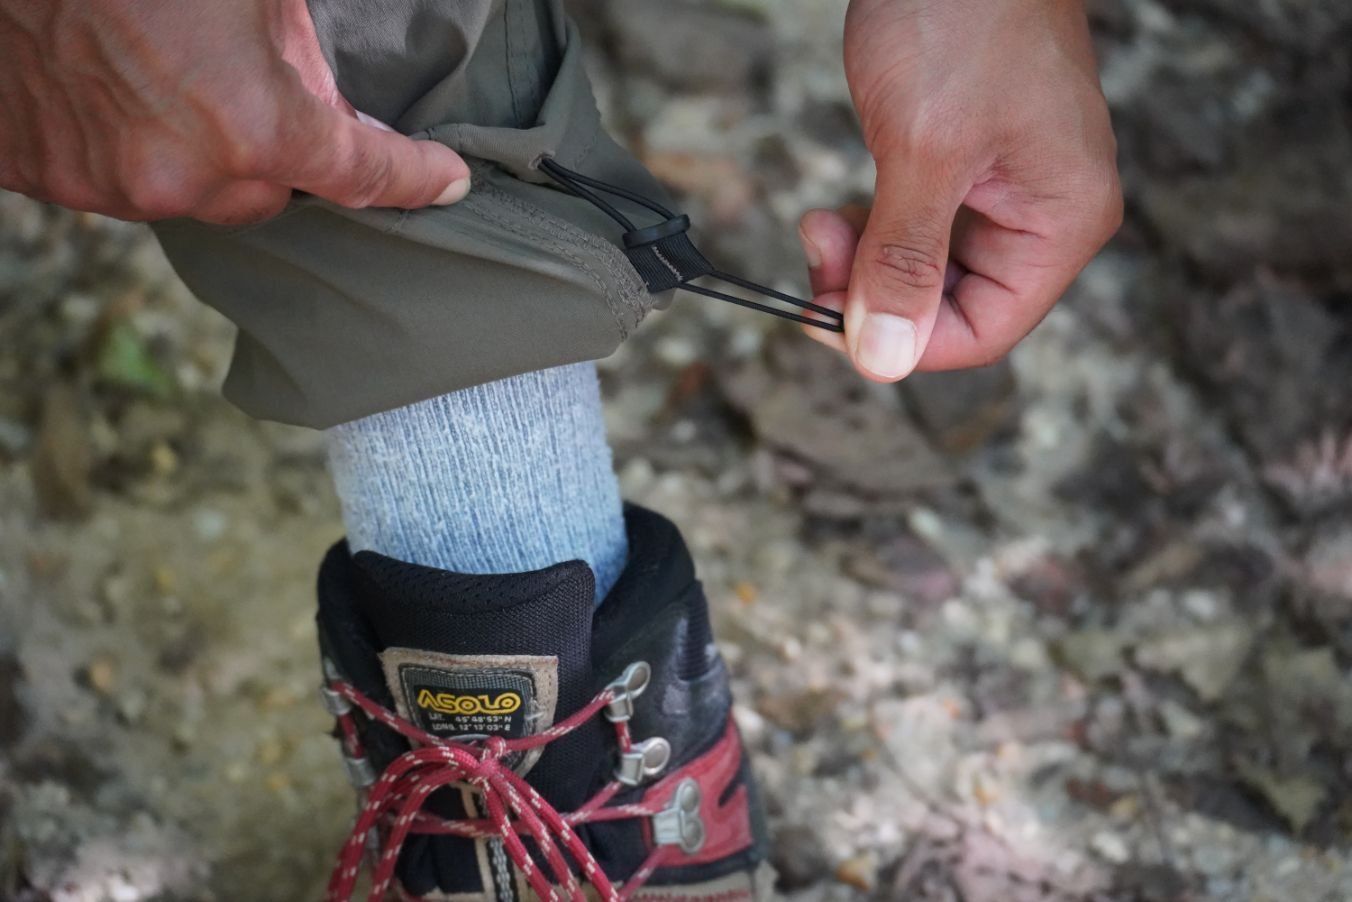 A close-up of the Kuhl Radikl hiking pants ankle tightening system